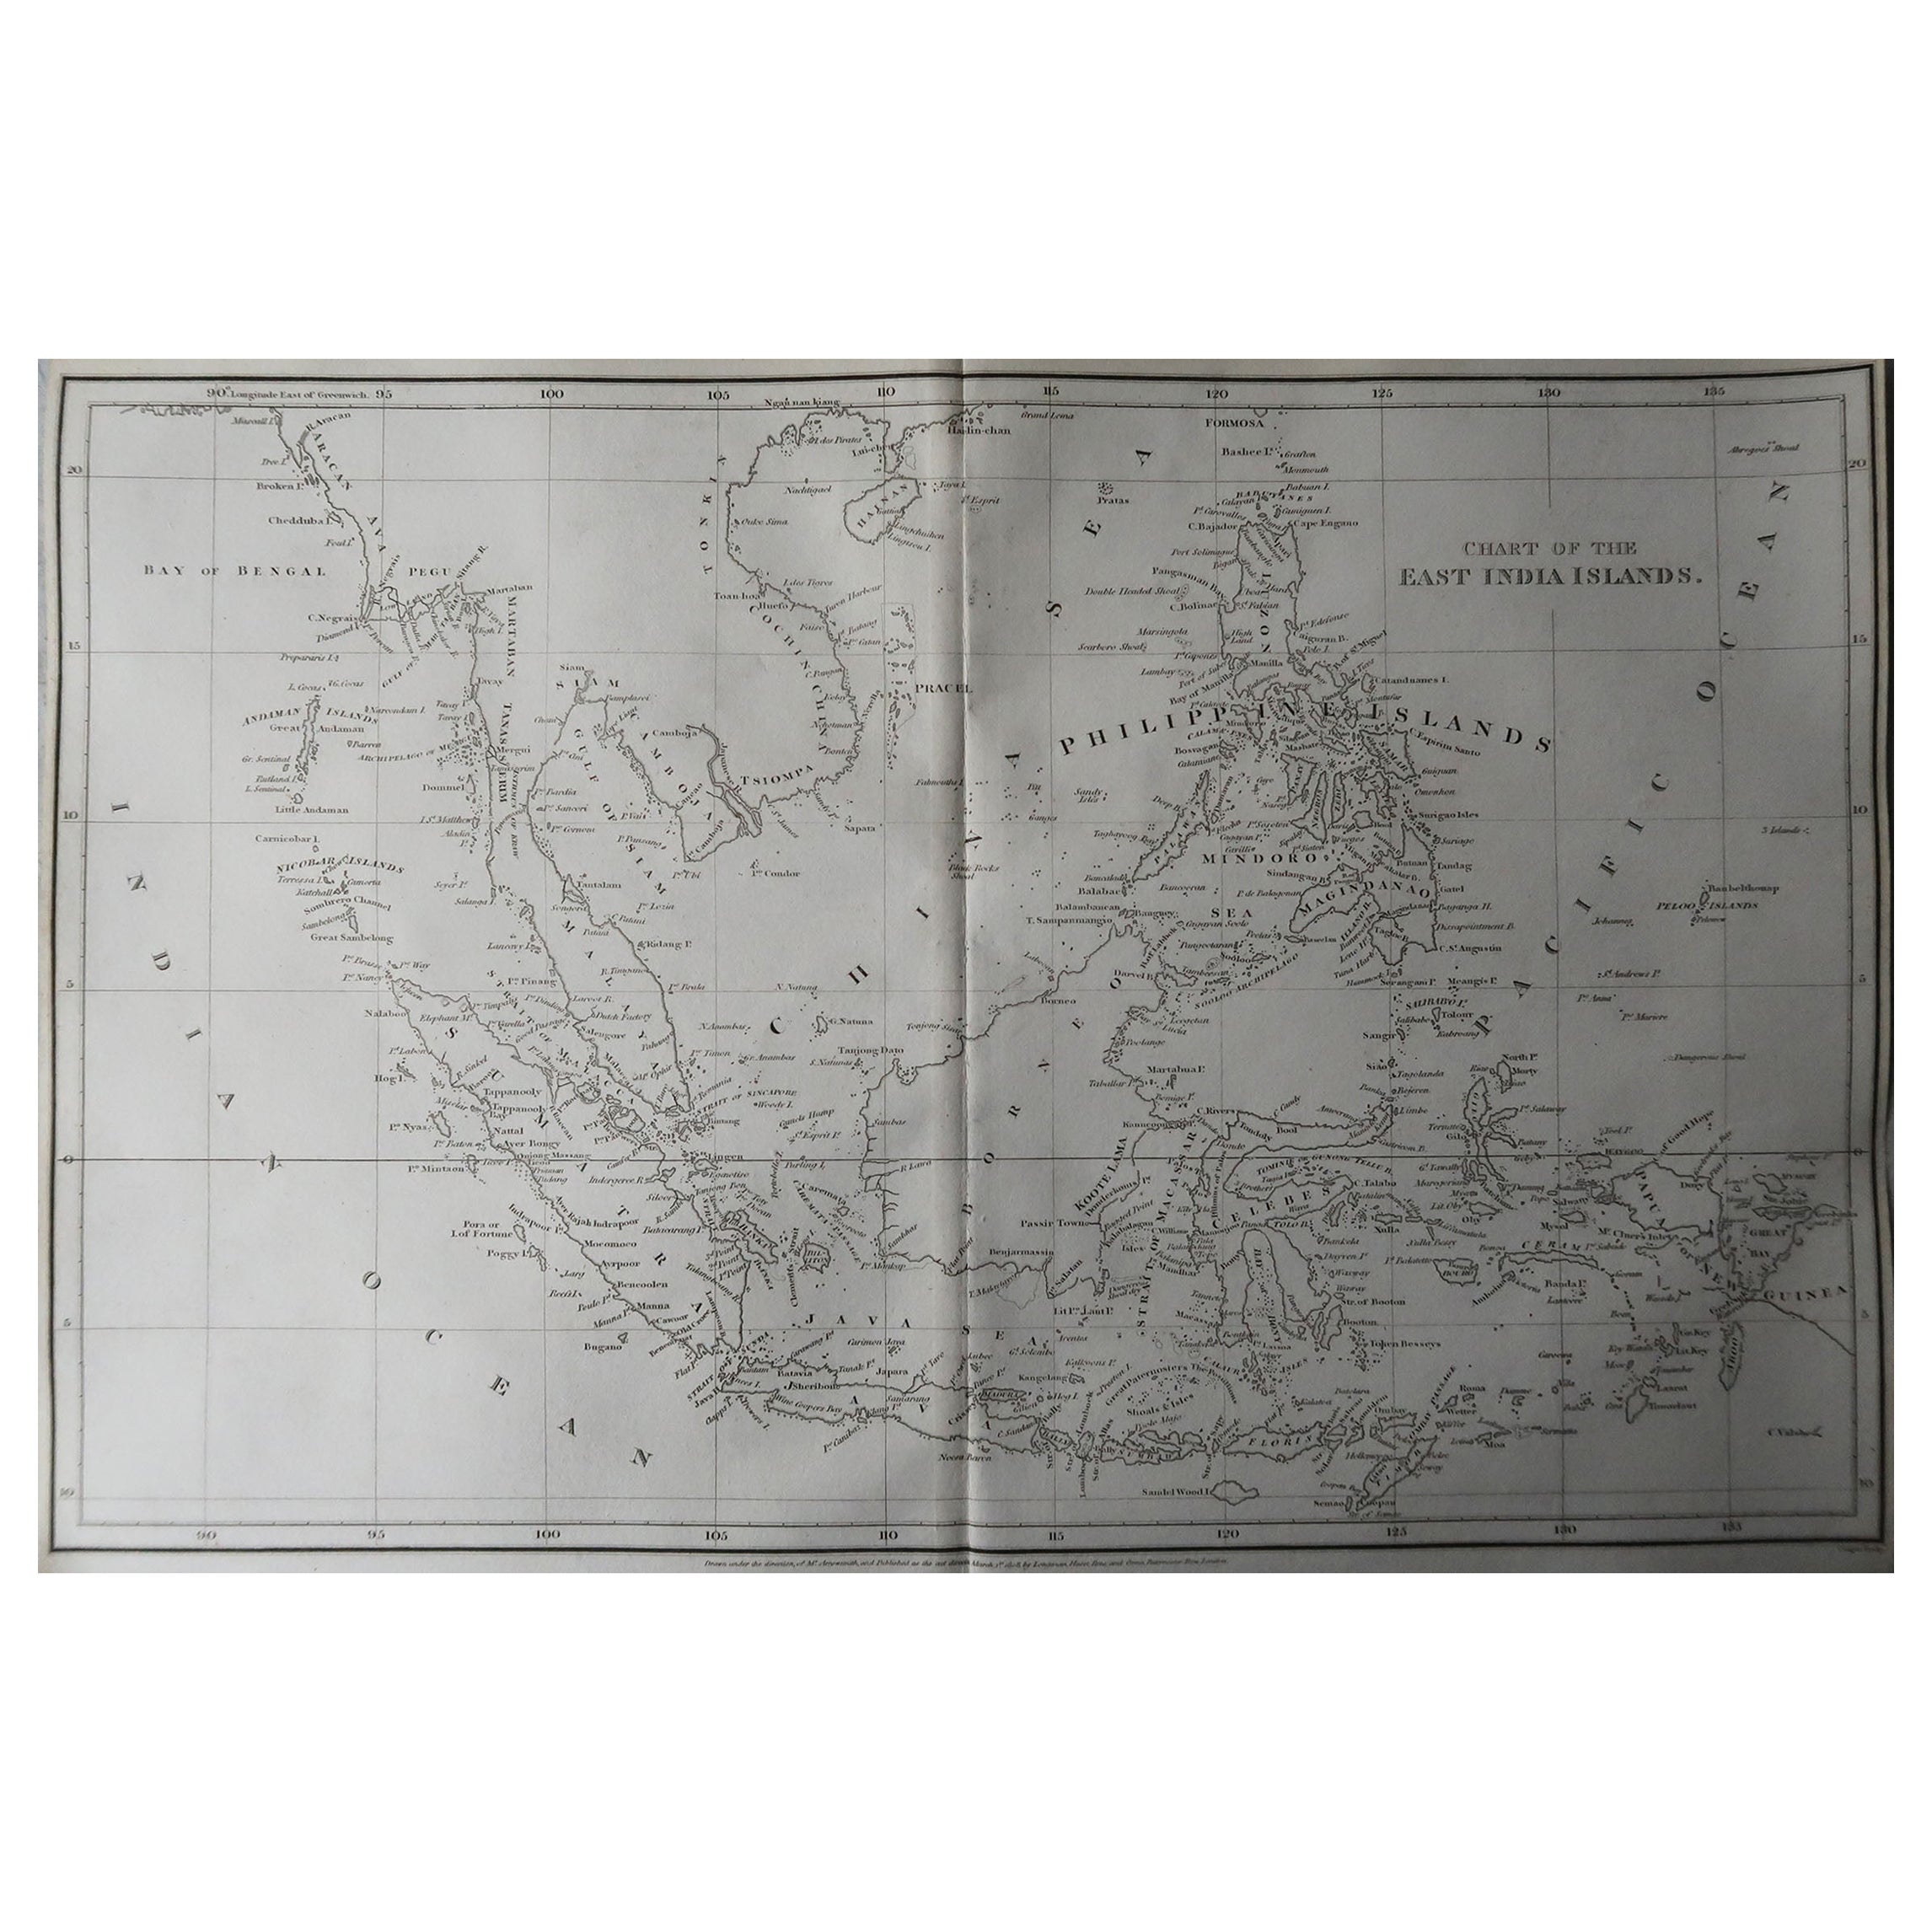 Great map of South East Asia

Drawn under the direction of Arrowsmith

Copper-plate engraving

Published by Longman, Hurst, Rees, Orme and Brown, 1820

Unframed.